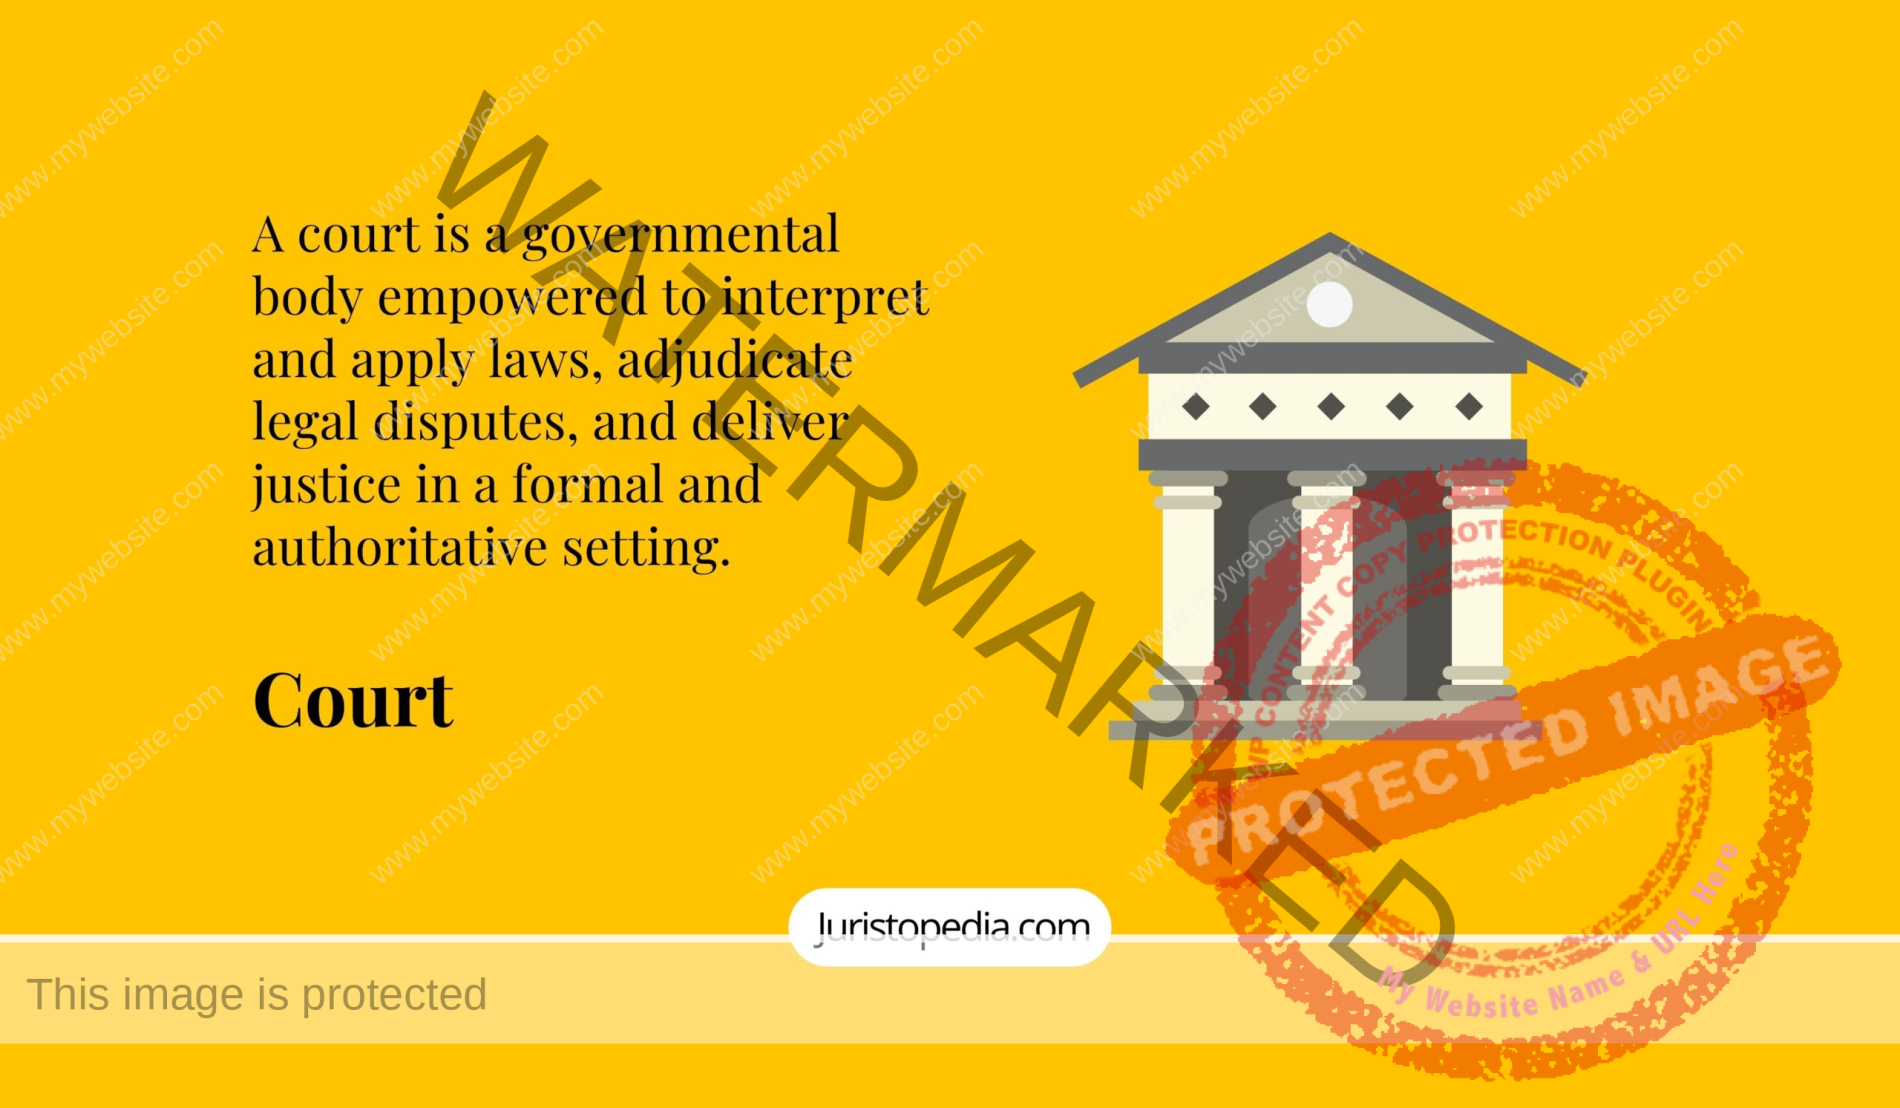 Court: Legal Definition, Types of Courts, Court Functions and Authority